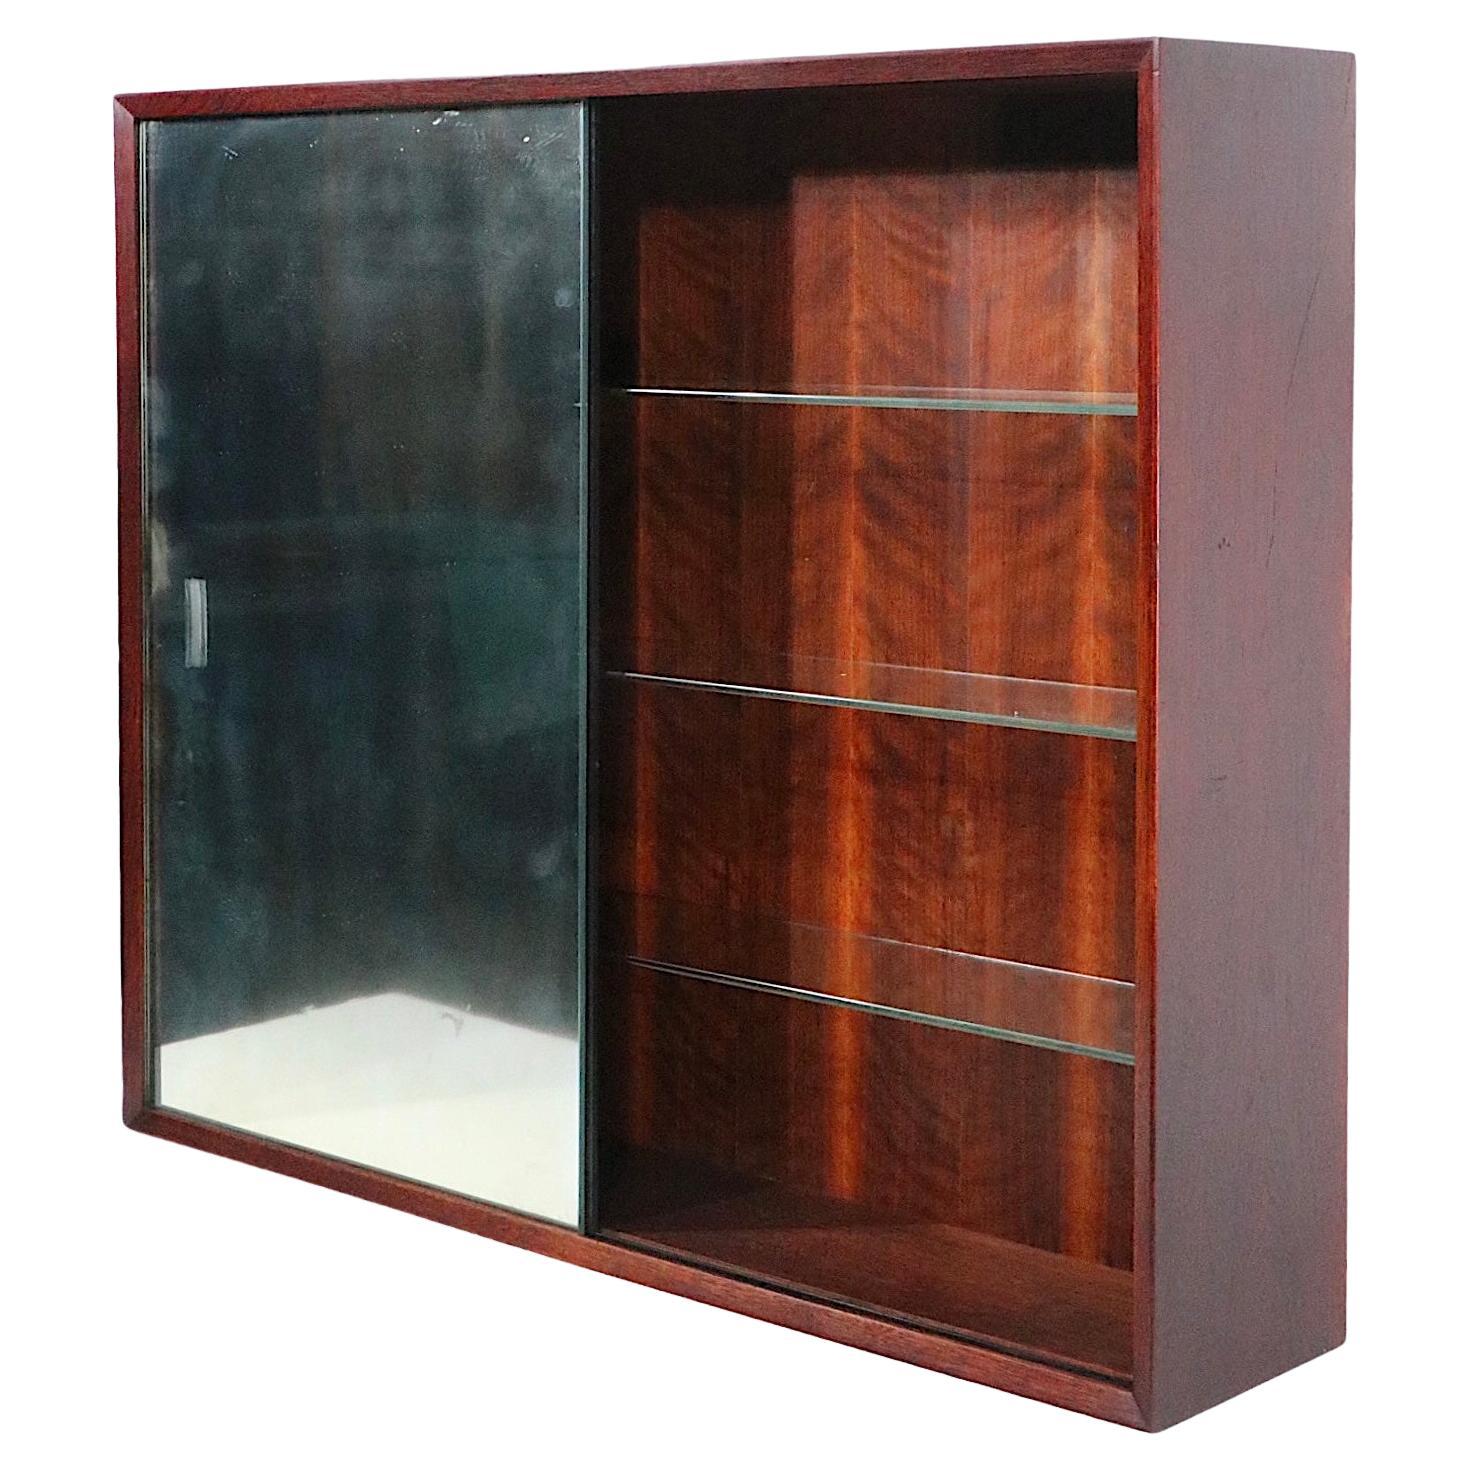 Danish Mid Century Wall Hanging Cabinet with Sliding Mirrored Doors, circa 1950s For Sale